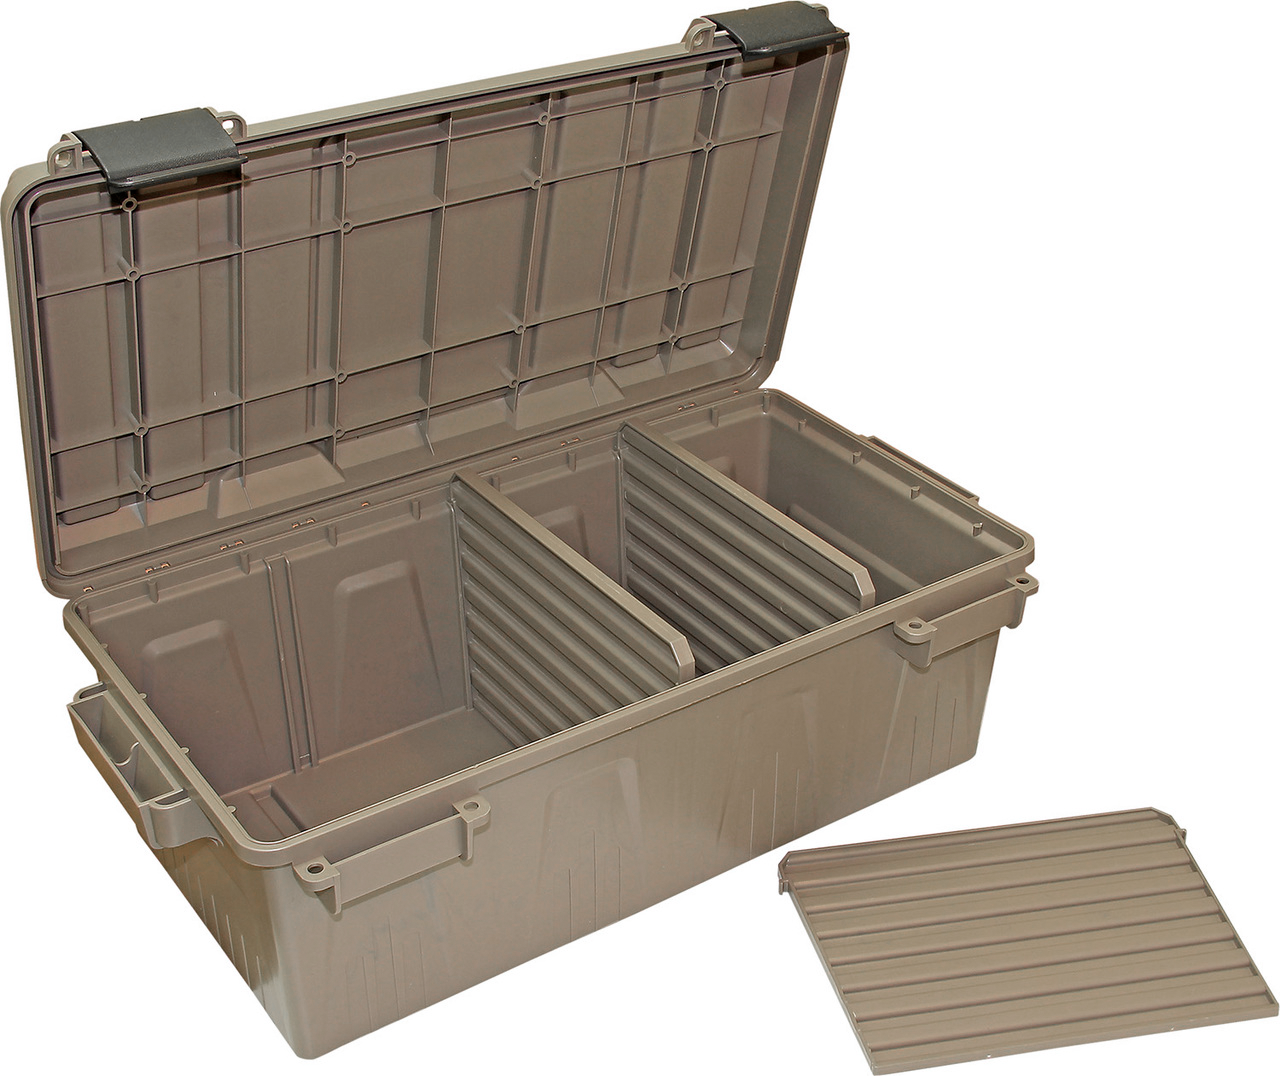 Dinosaurized ammo storage box protects your gears & gun from